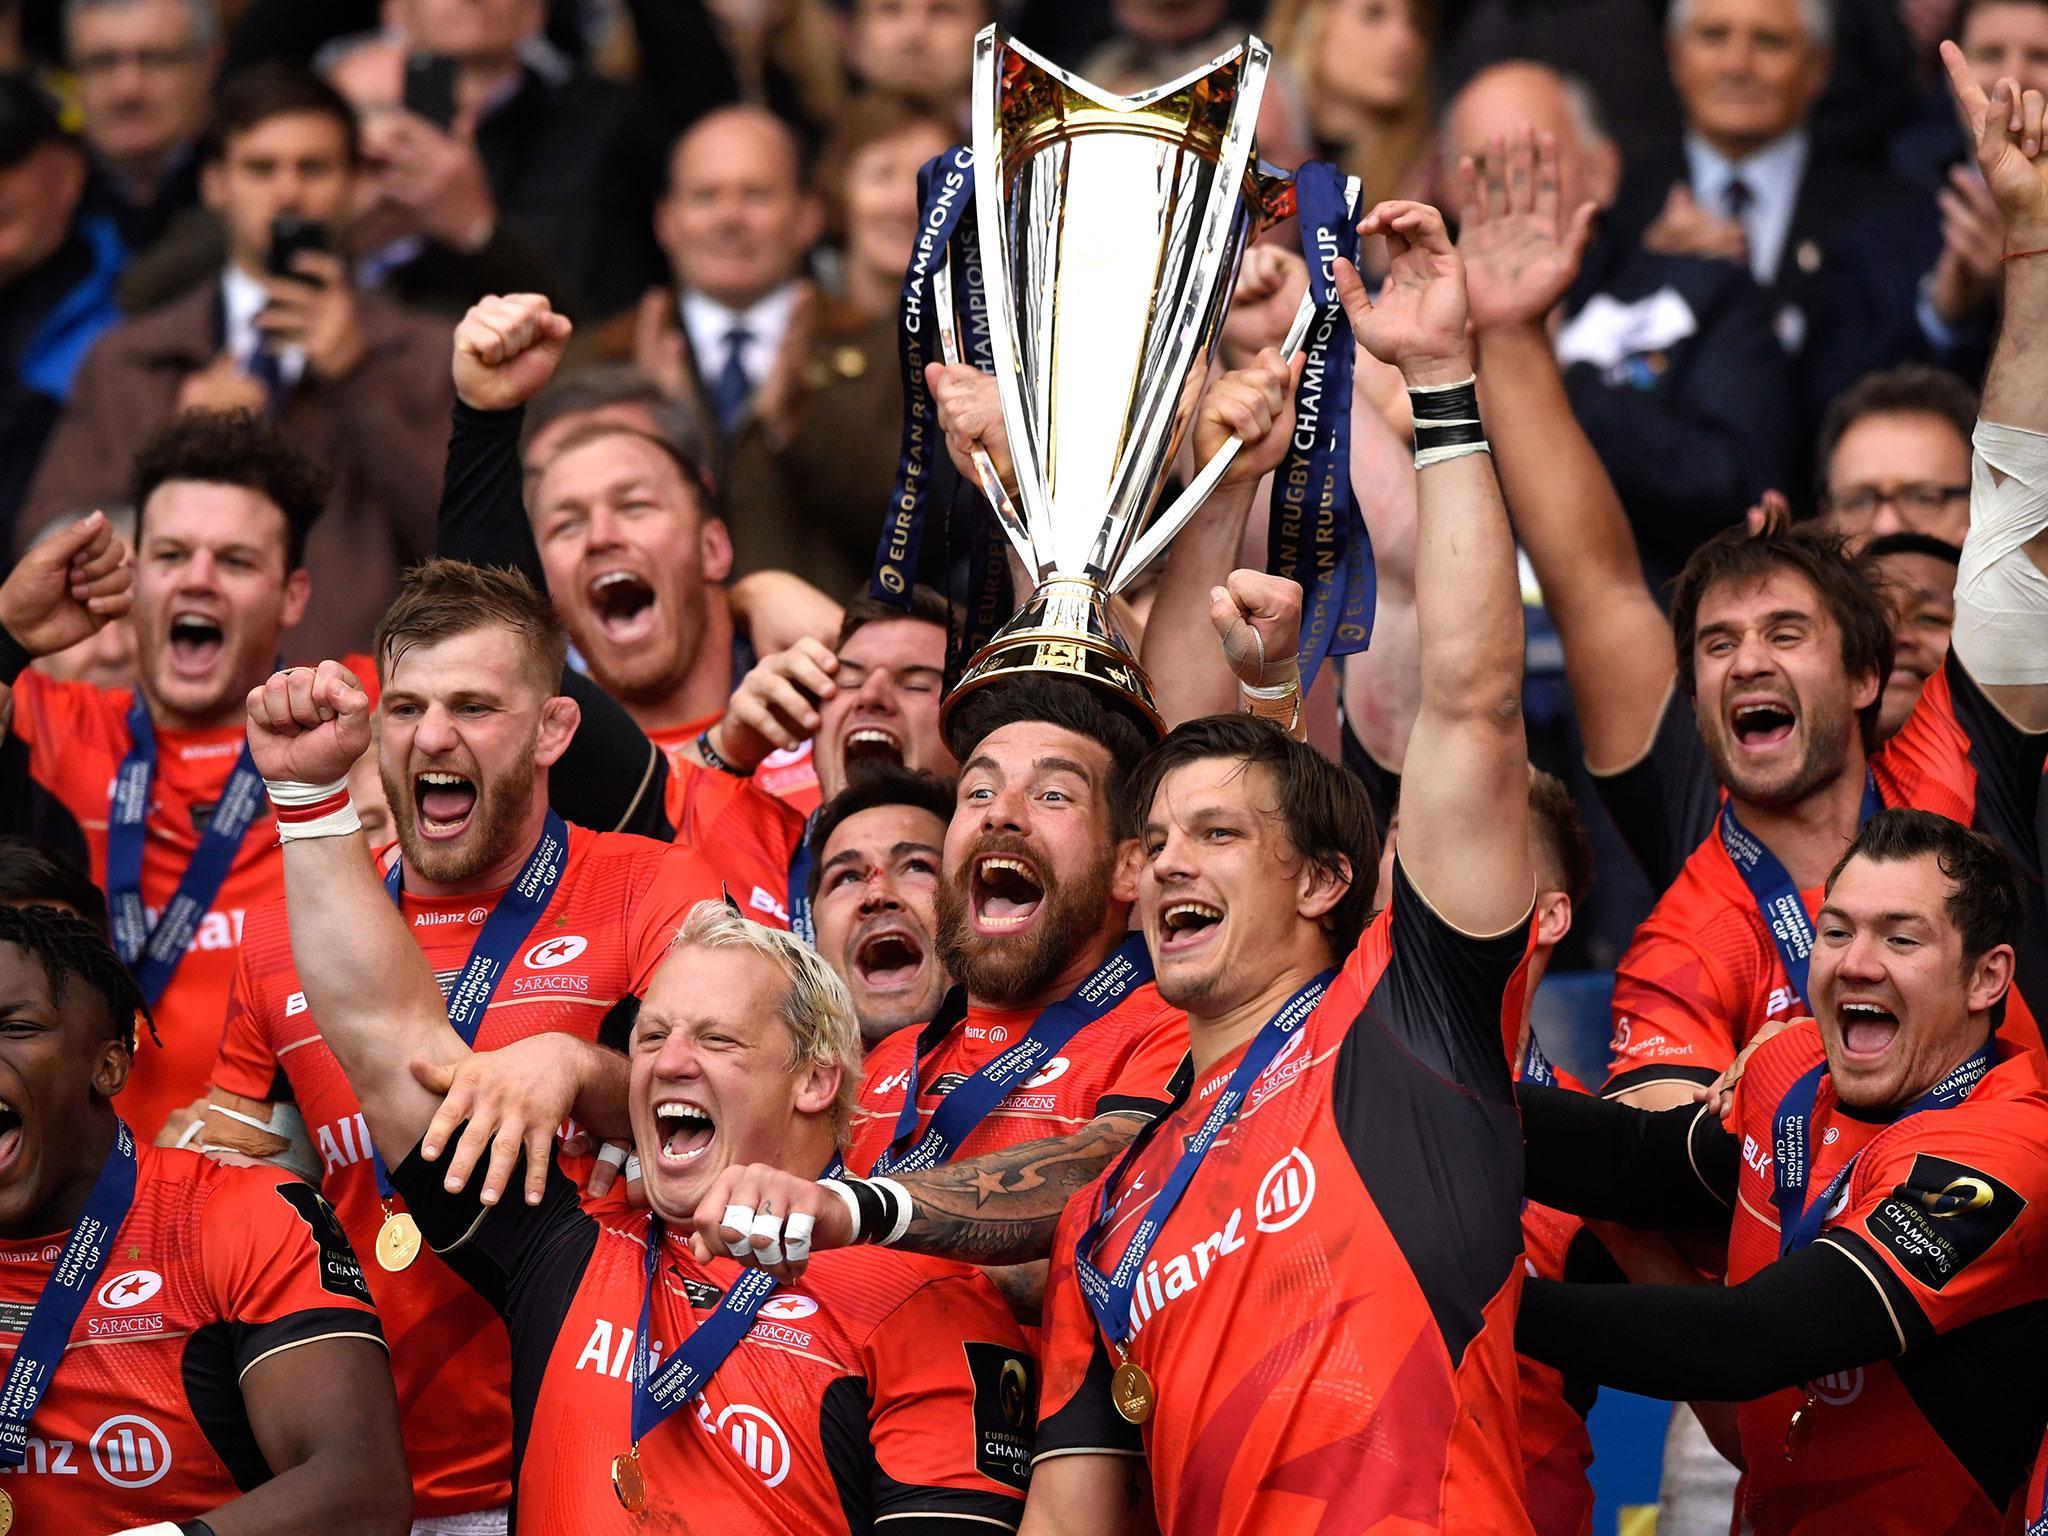 Saracens have dominated the European game under Mark McCall